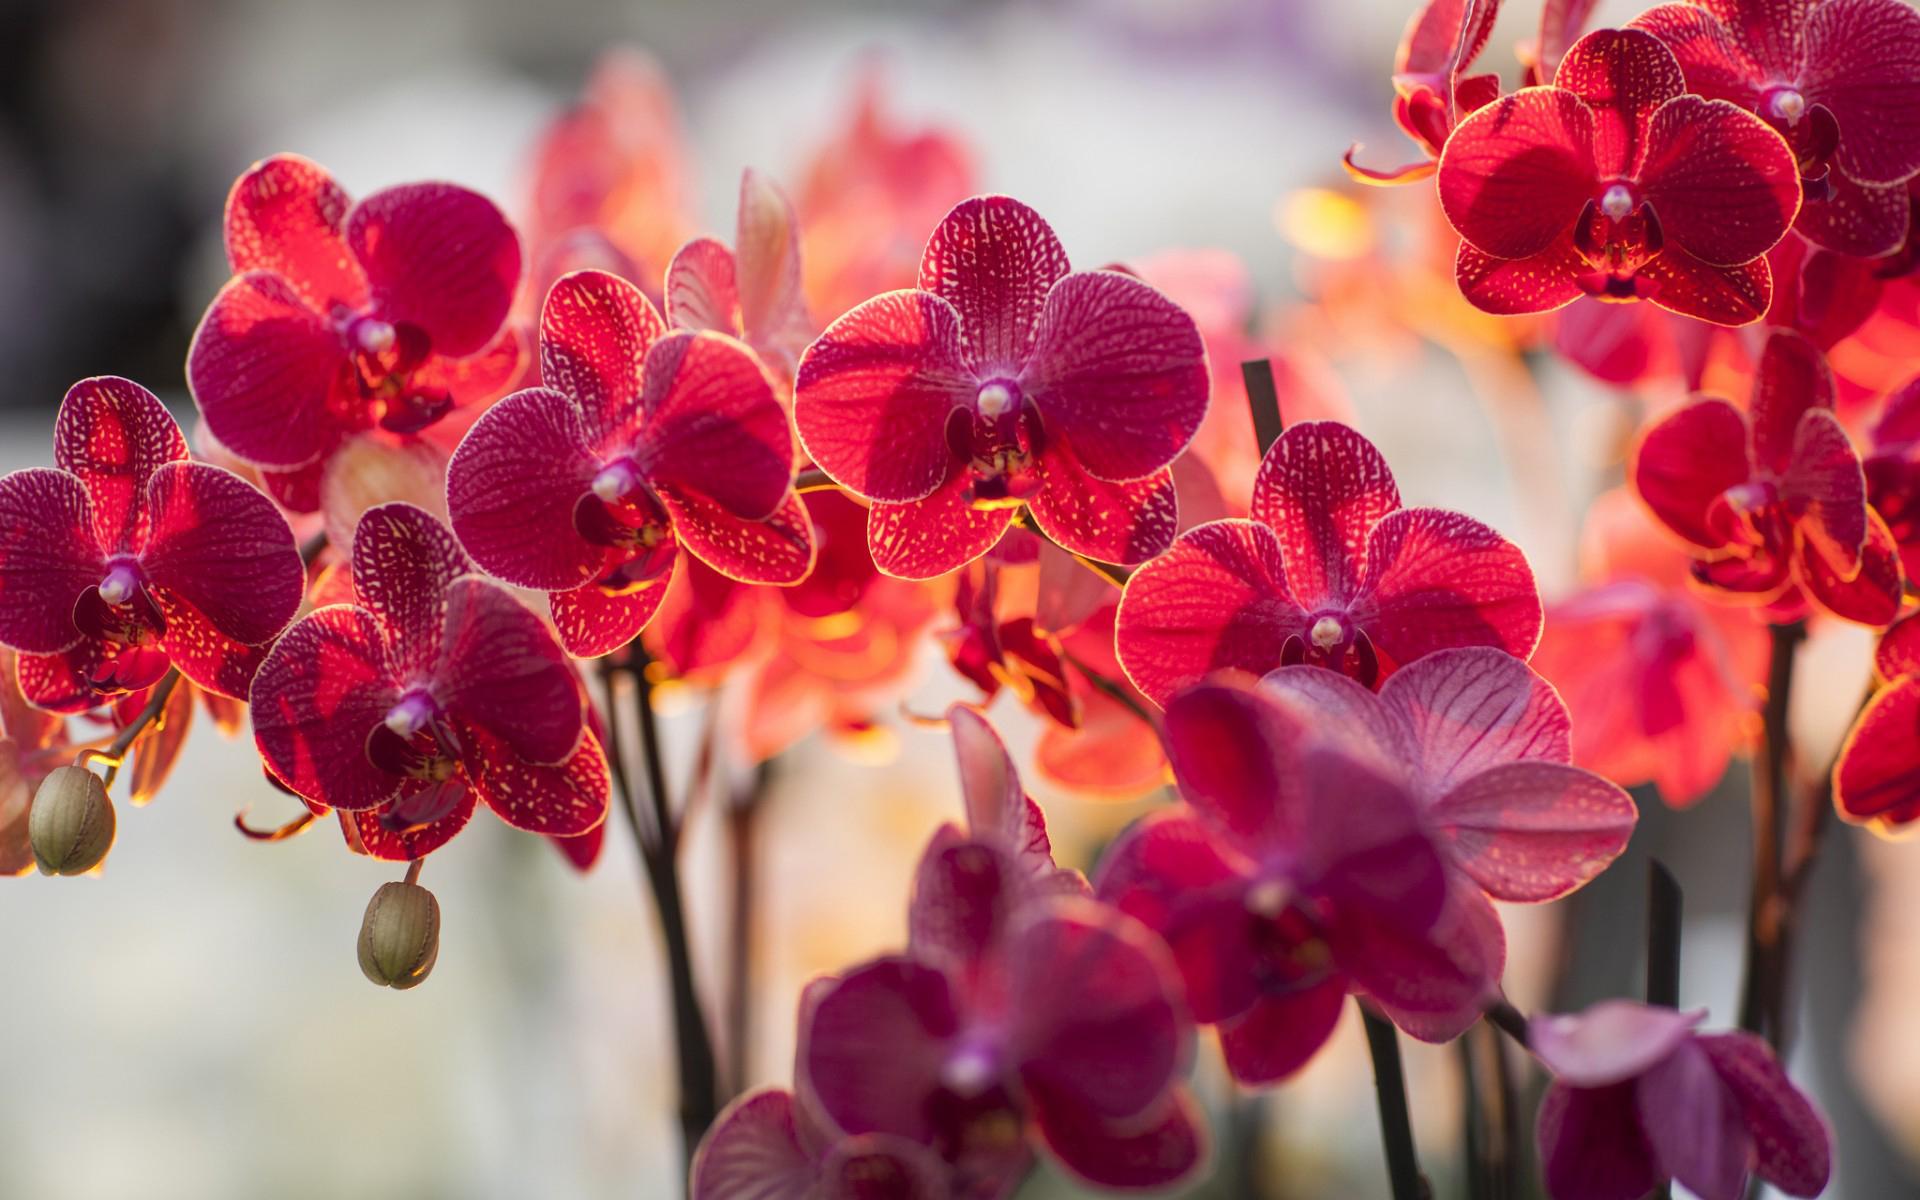 Orchid Flowers Wallpaper HD 49018 1920x1200px